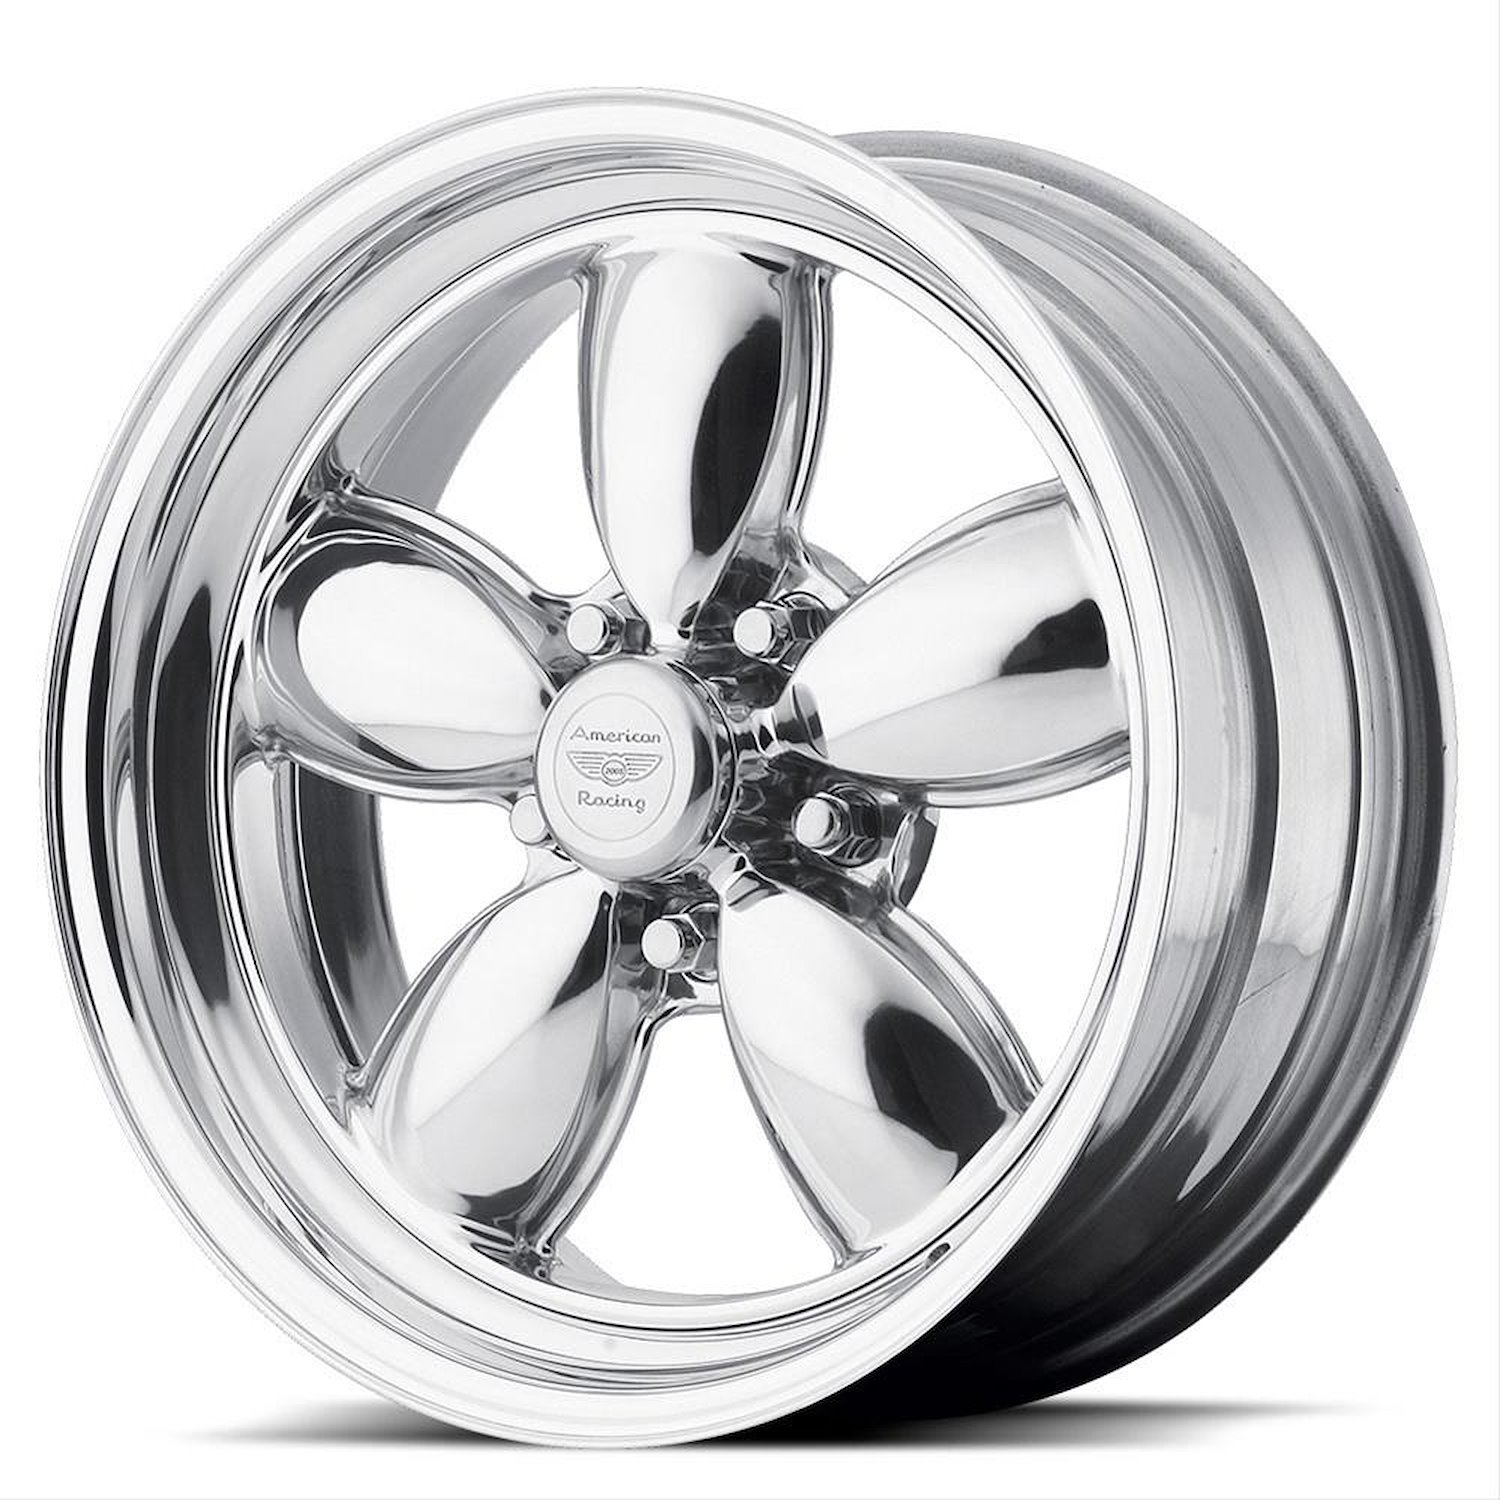 AMERICAN RACING CLASSIC 200S TWO-PIECE POLISHED 17 x 8 5X4.75 19 5.25